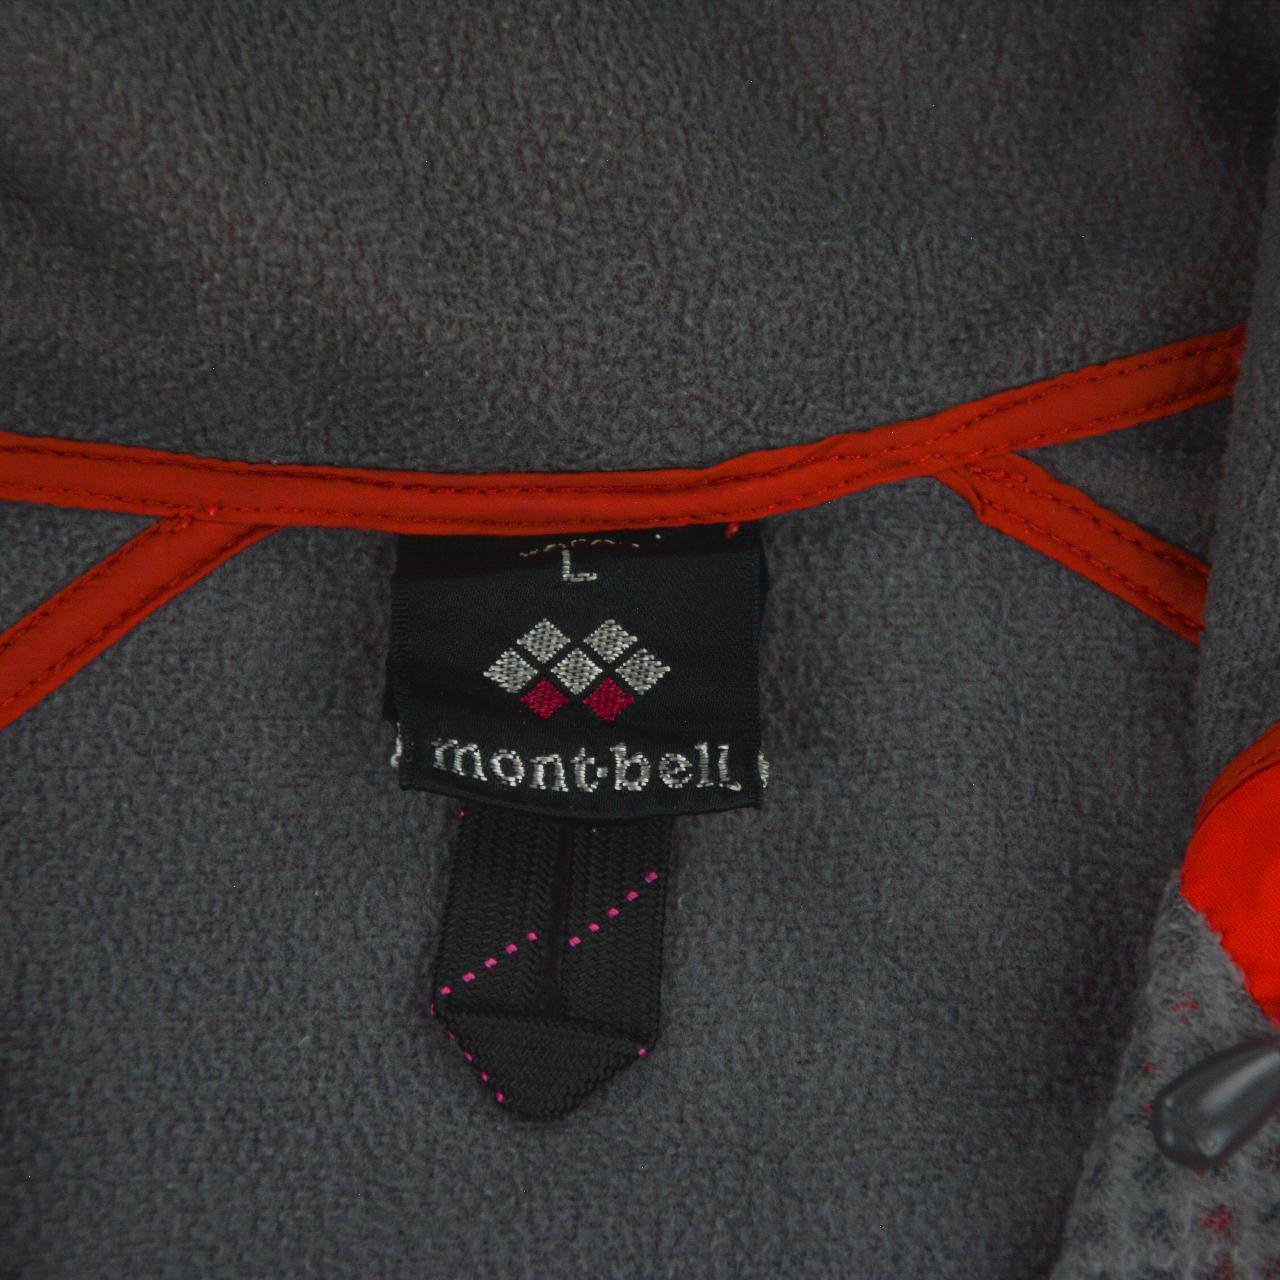 Vintage Montbell Soft Shell Jacket Woman’s Size S - Known Source